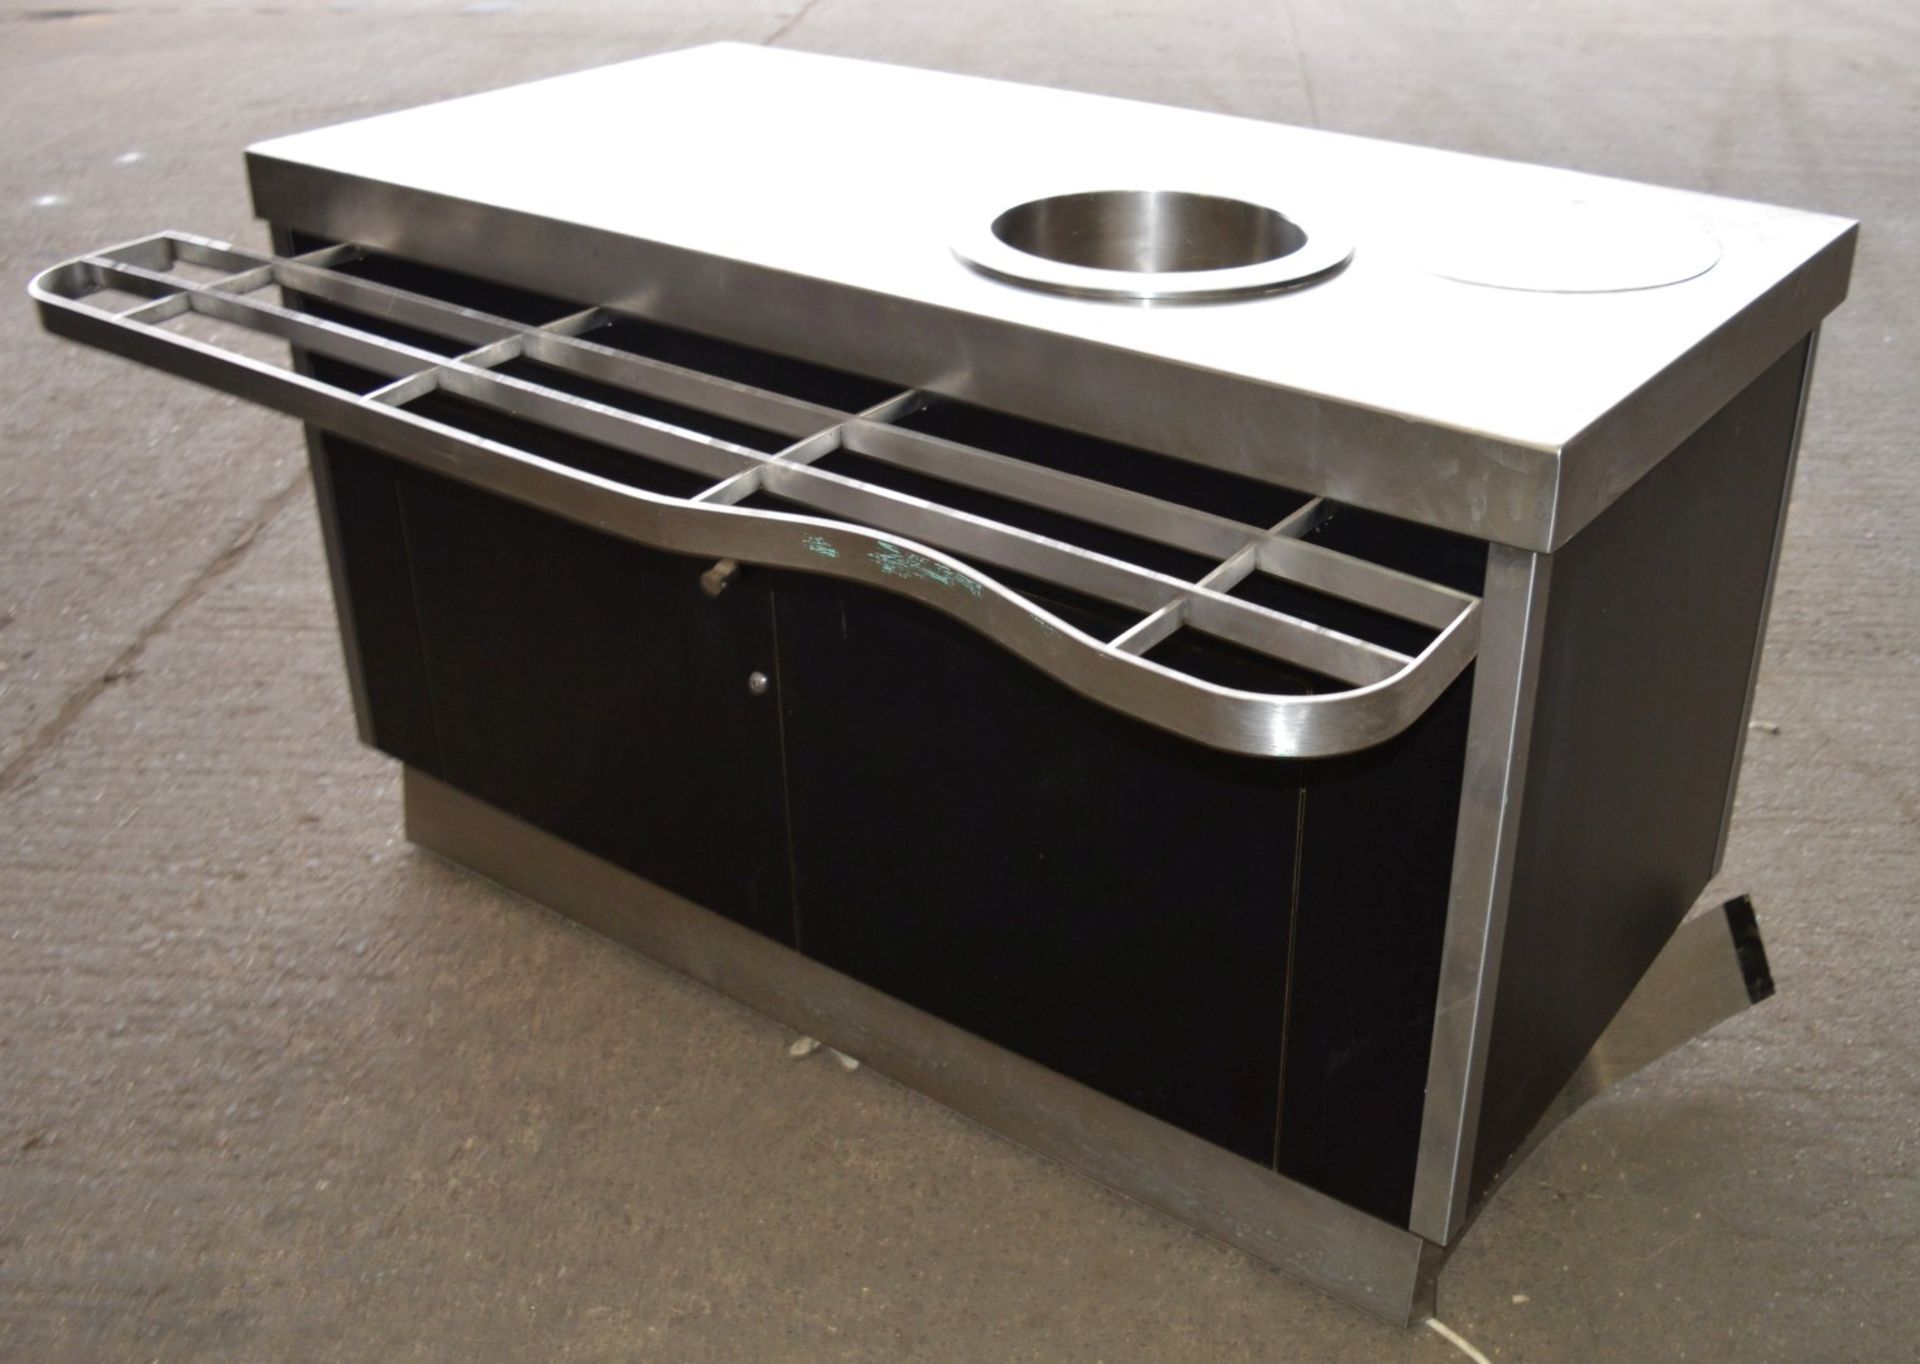 1 x Serving Counter With Stainless Steel Top and Plate Dispenser - On Castors For - Image 2 of 6